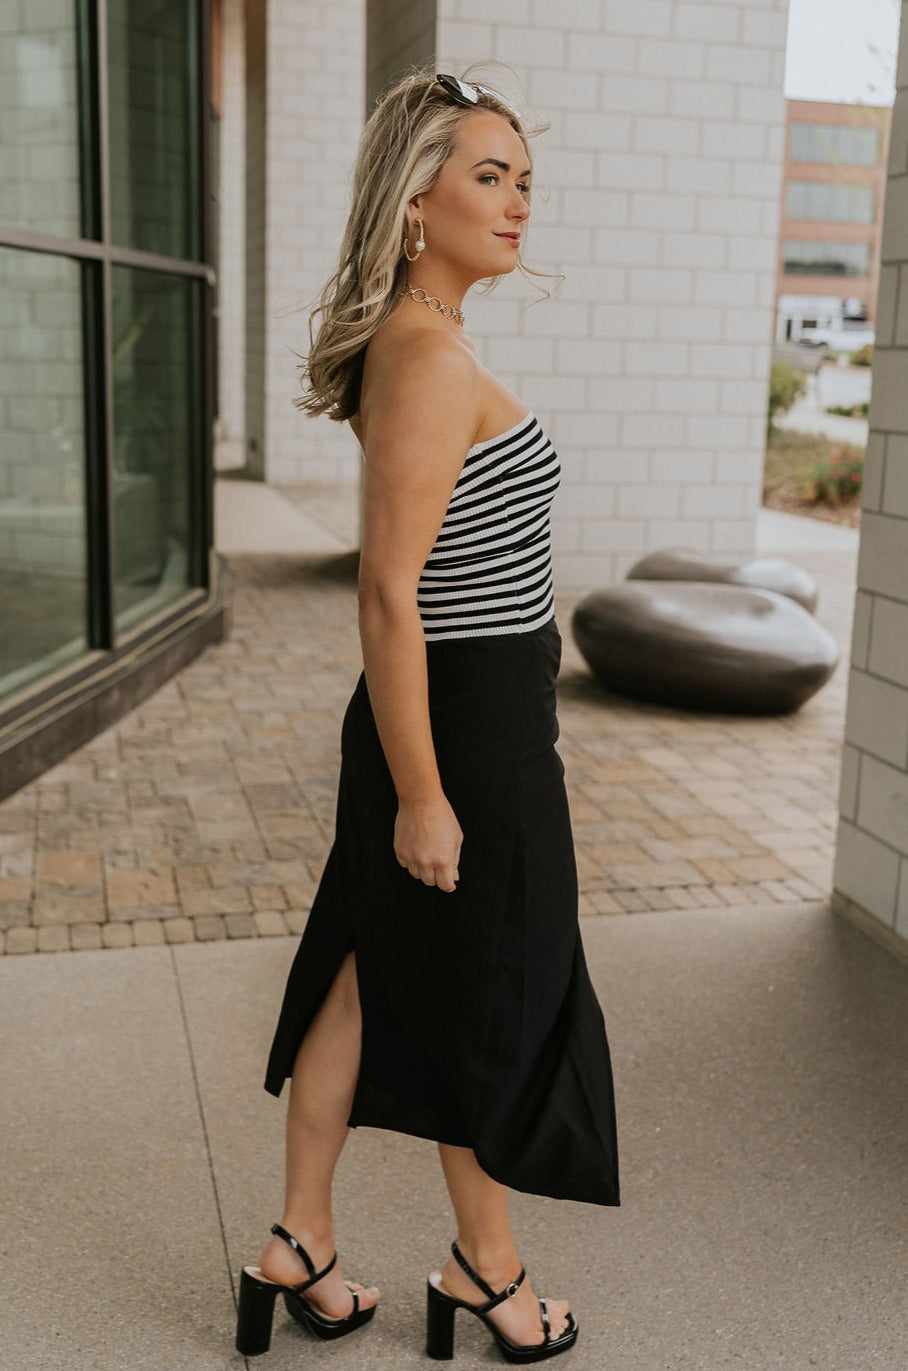 Full body side view of model wearing the Arabella Black Wrap Midi Skirt that has black lightweight fabric, a wrap front with a side tie detail, and back slit. Worn with striped tube top.